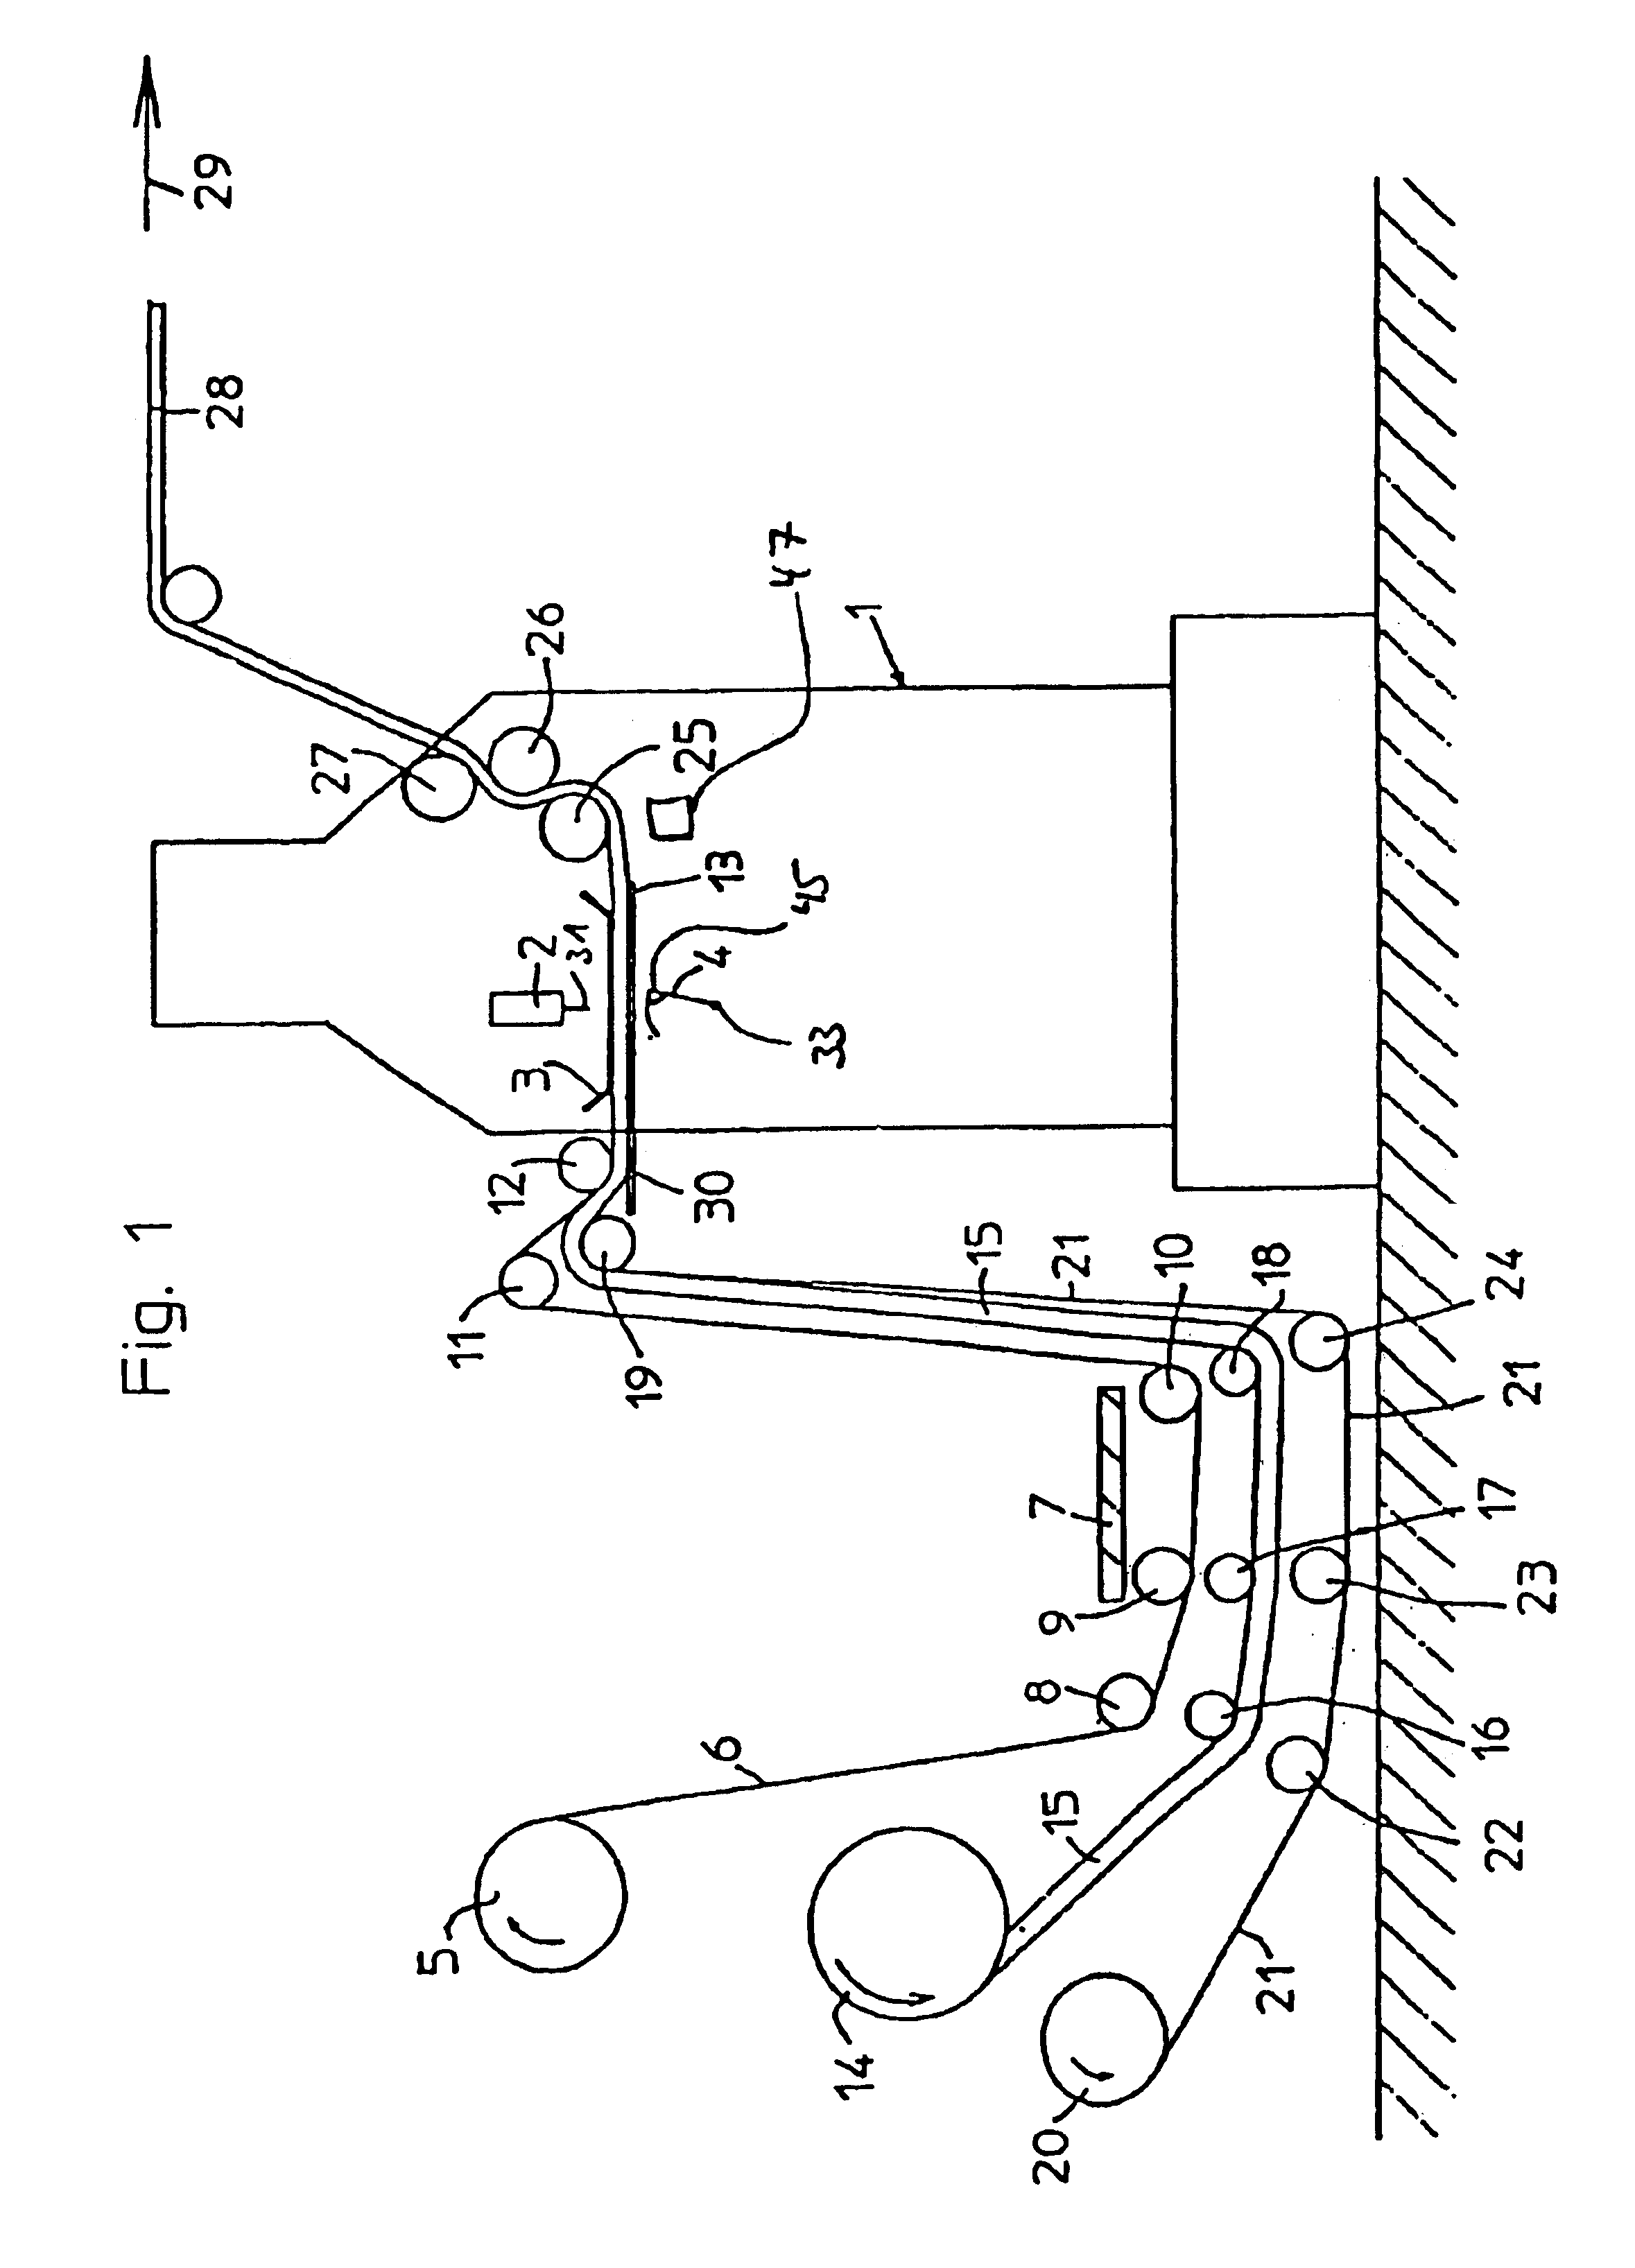 Chain stitch multi-needle quilting machine and method to create a pattern in a quilting material